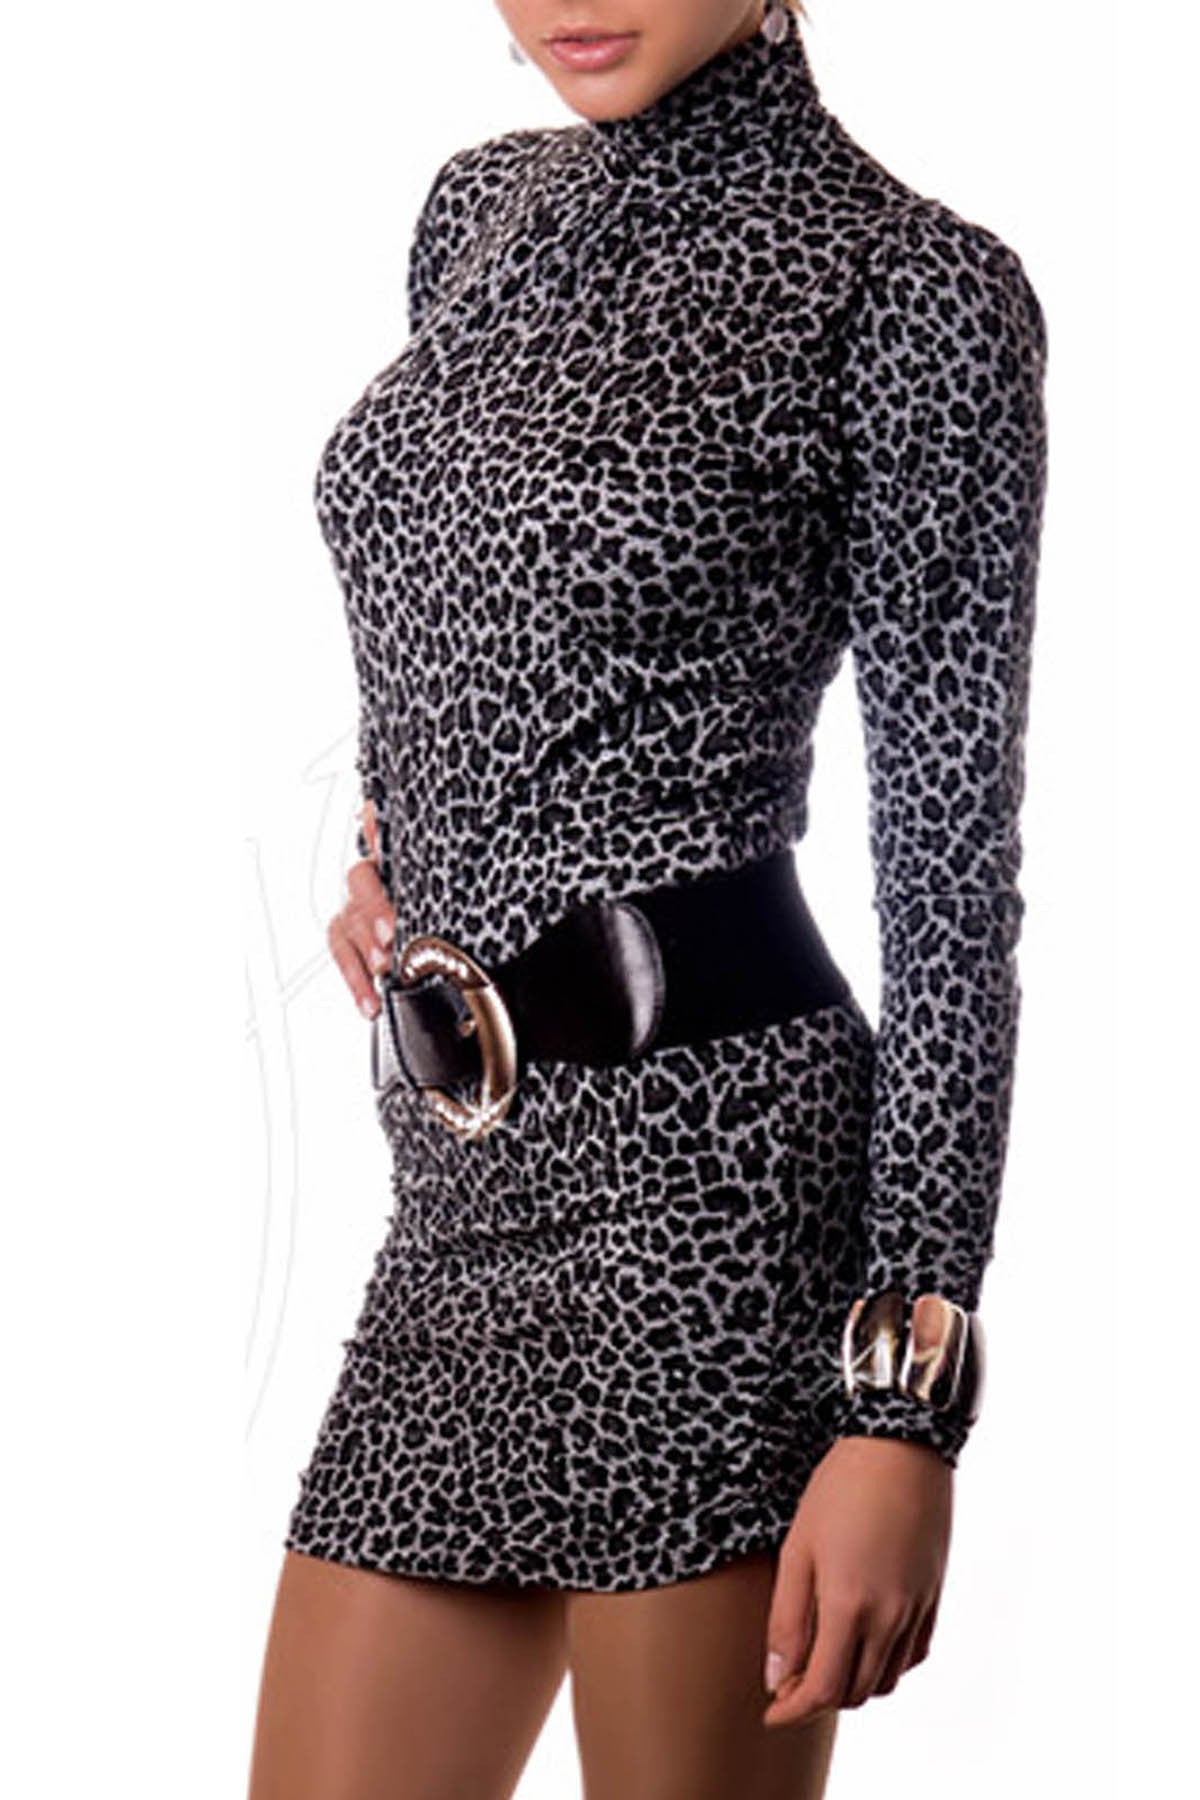 Women's Sexy Long Sleeved Tunic Top Polo Neck Turtle Neck Animal Print